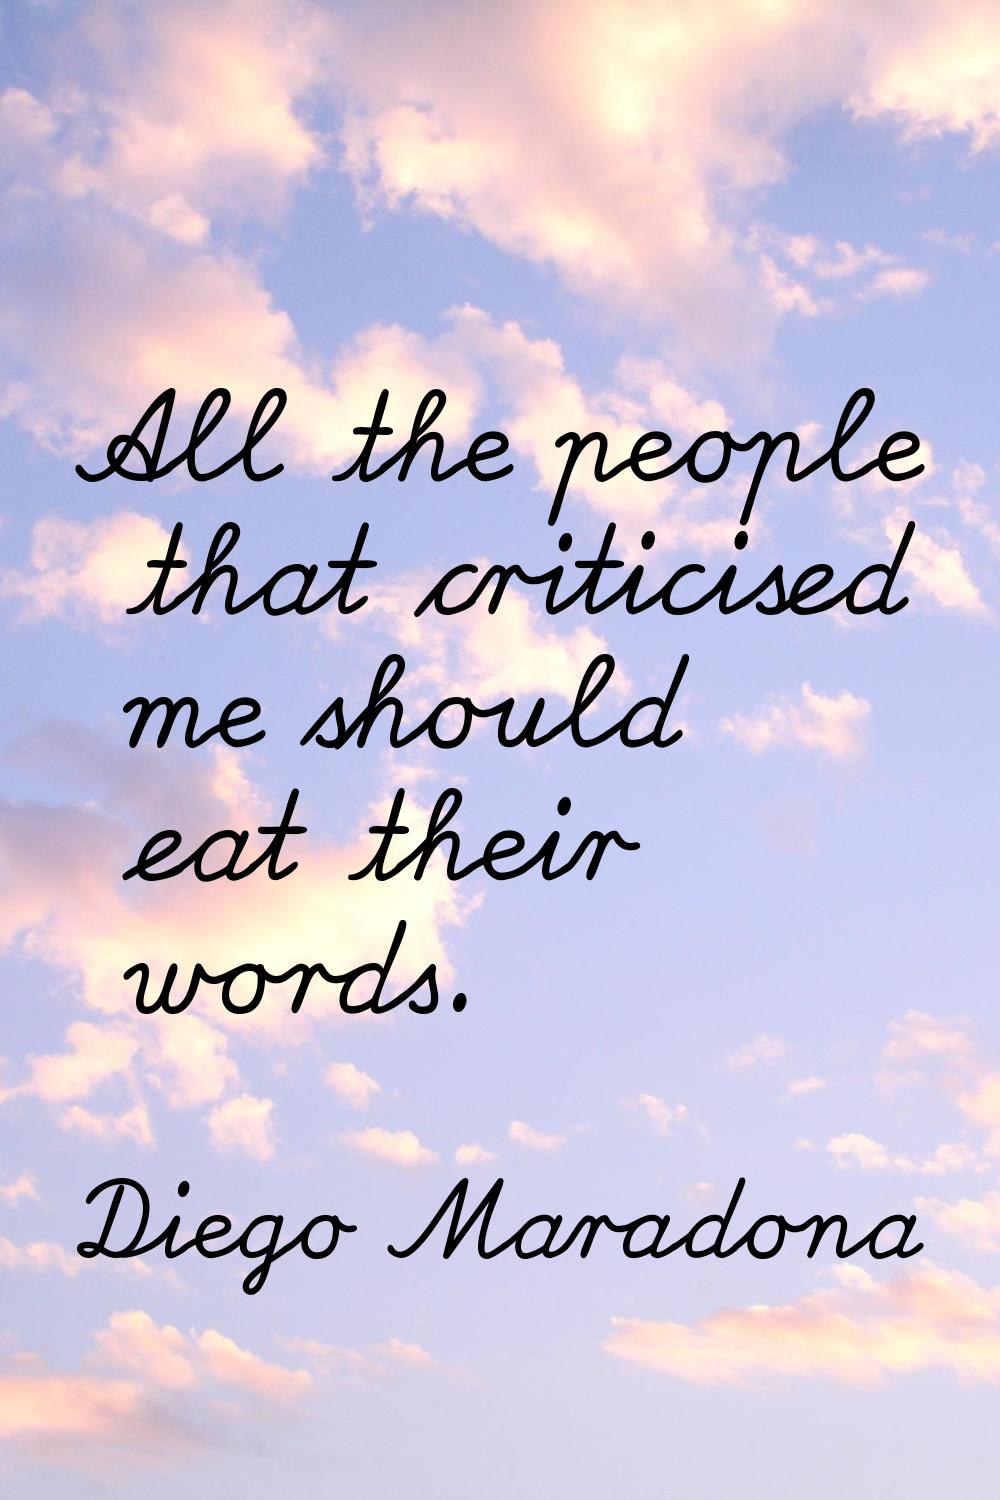 All the people that criticised me should eat their words.